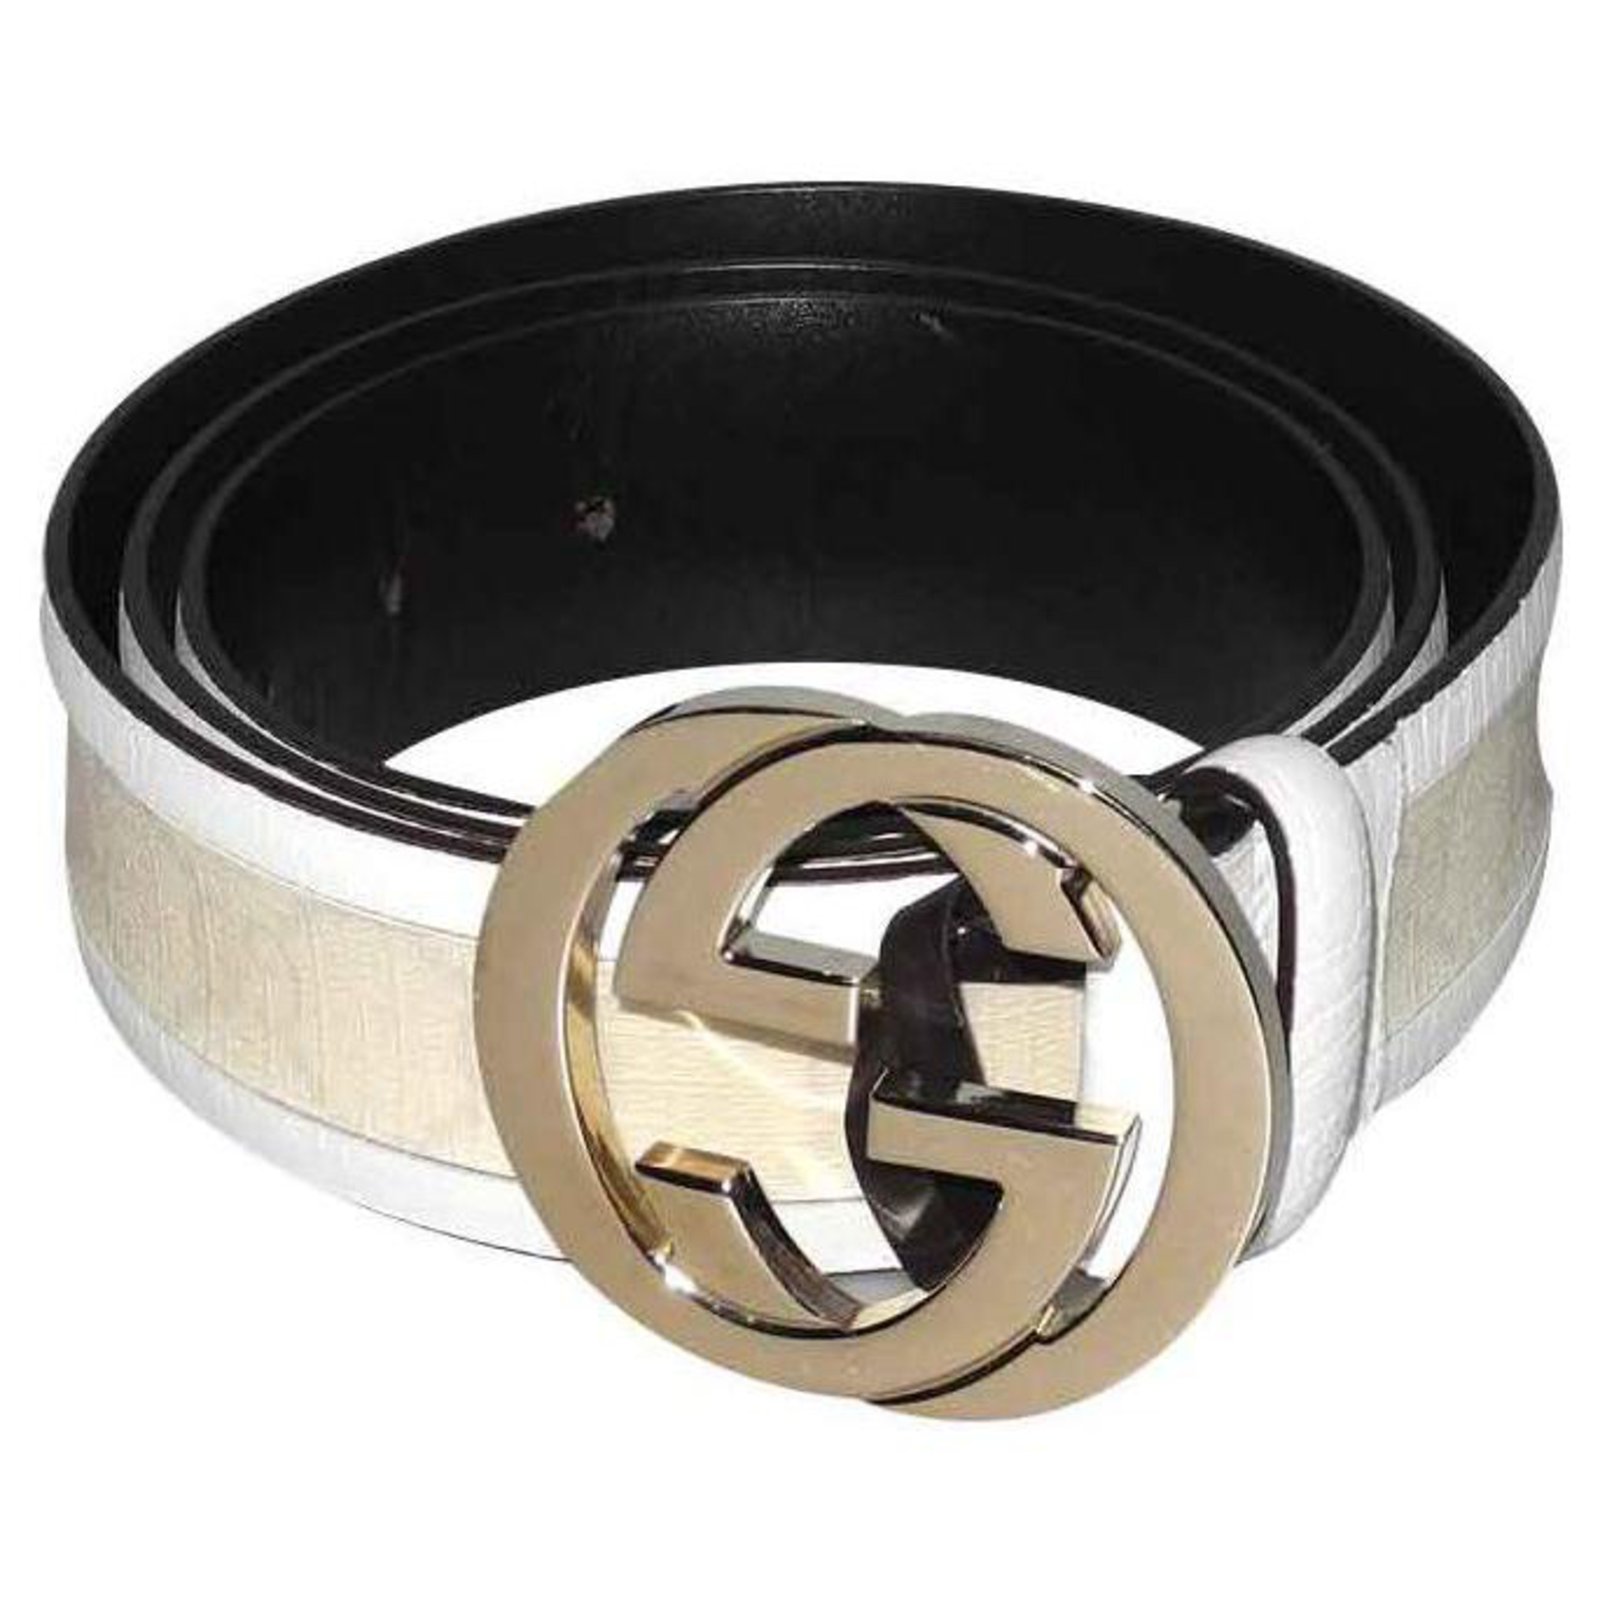 real white gucci belt